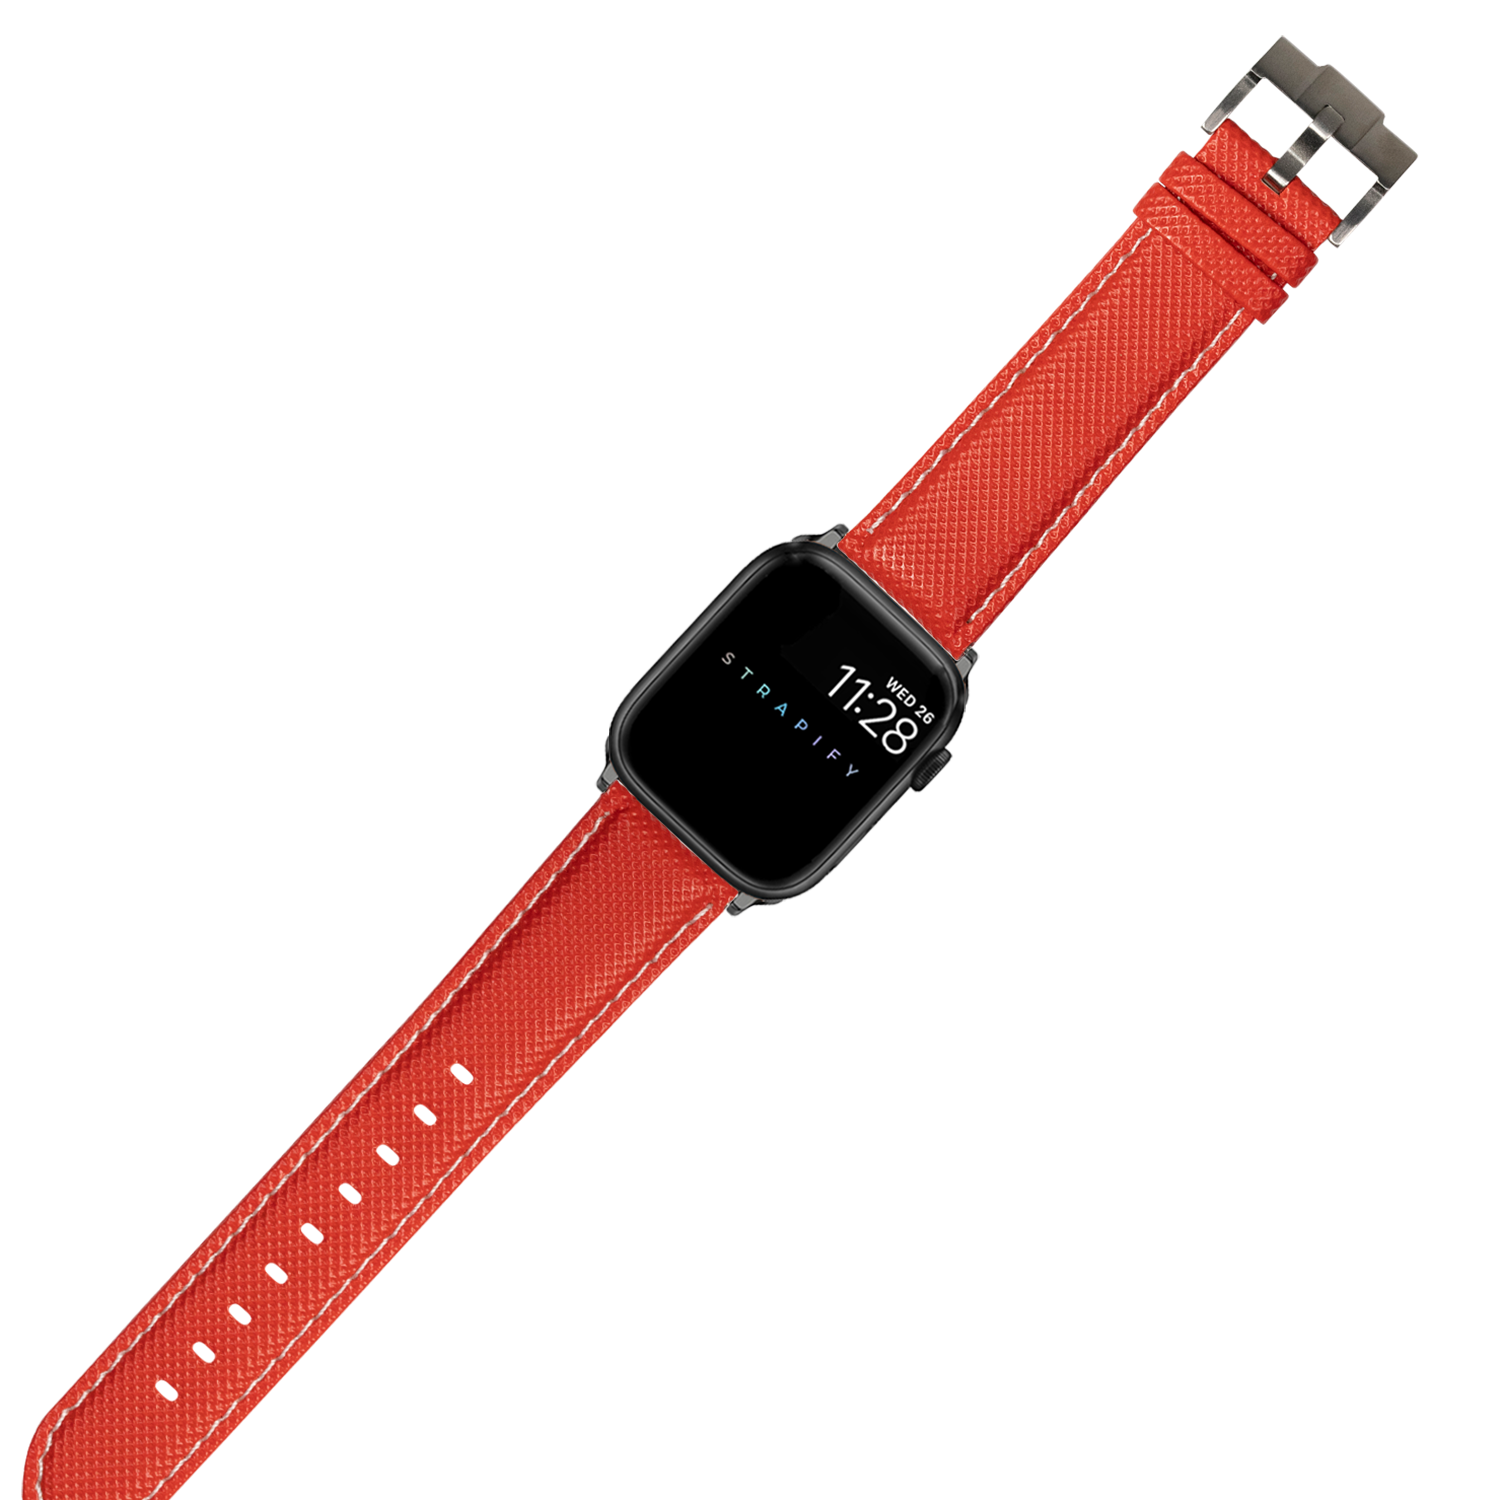 [Apple Watch] Sailcloth - Red with White Stitching